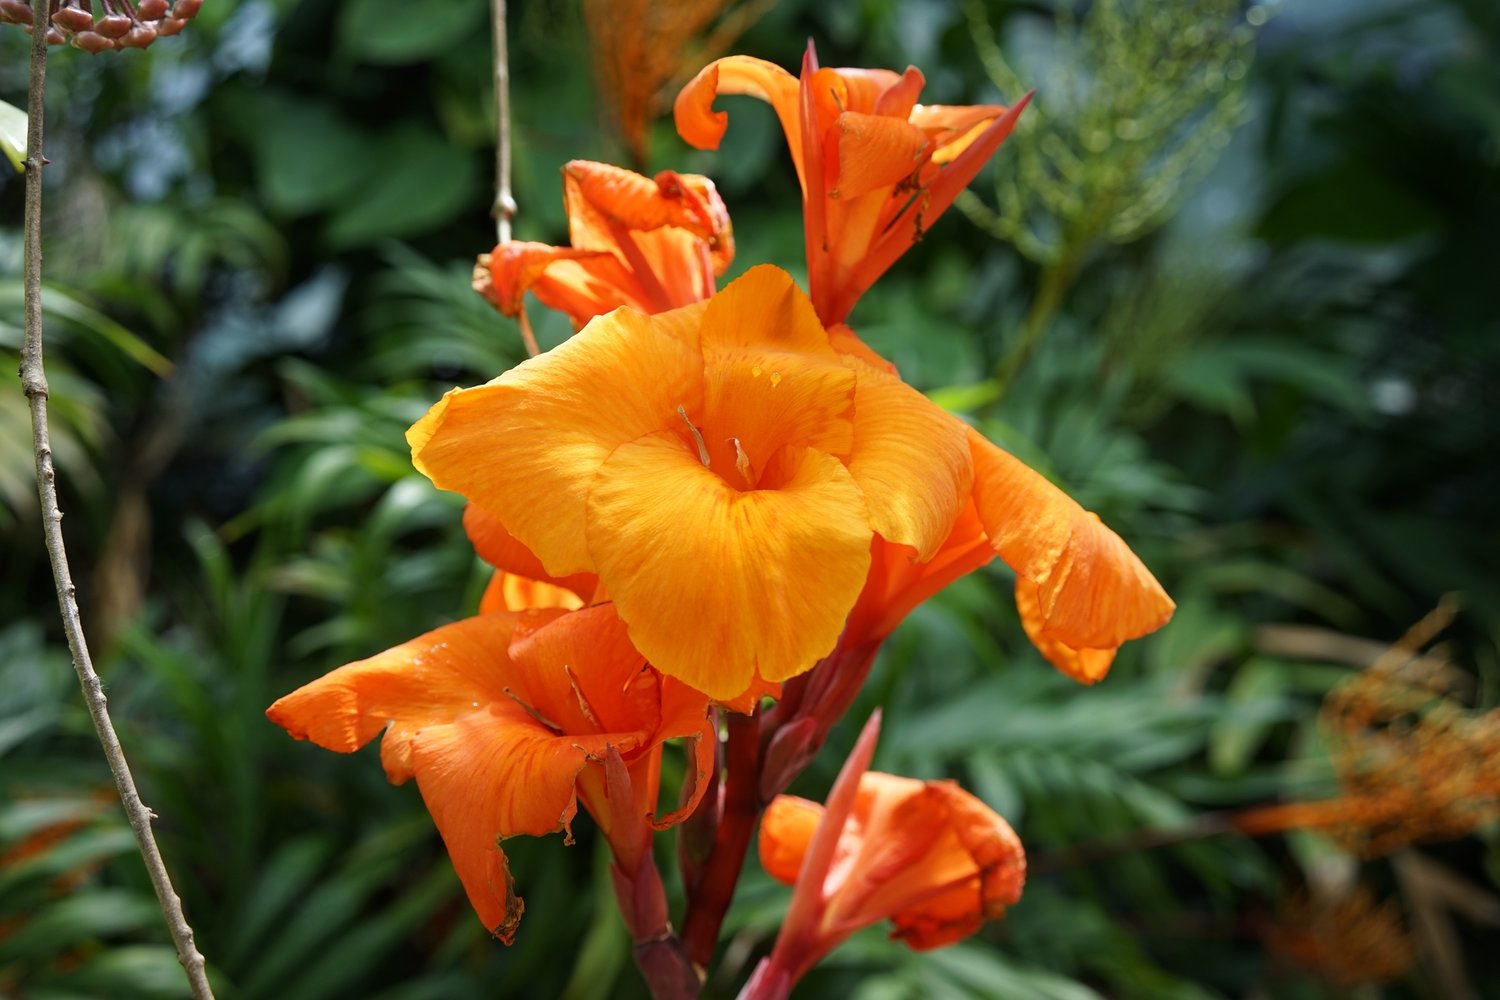 A closeup shot of a bundle of Canna Lilies in a garden full of plants on a cloudy day.